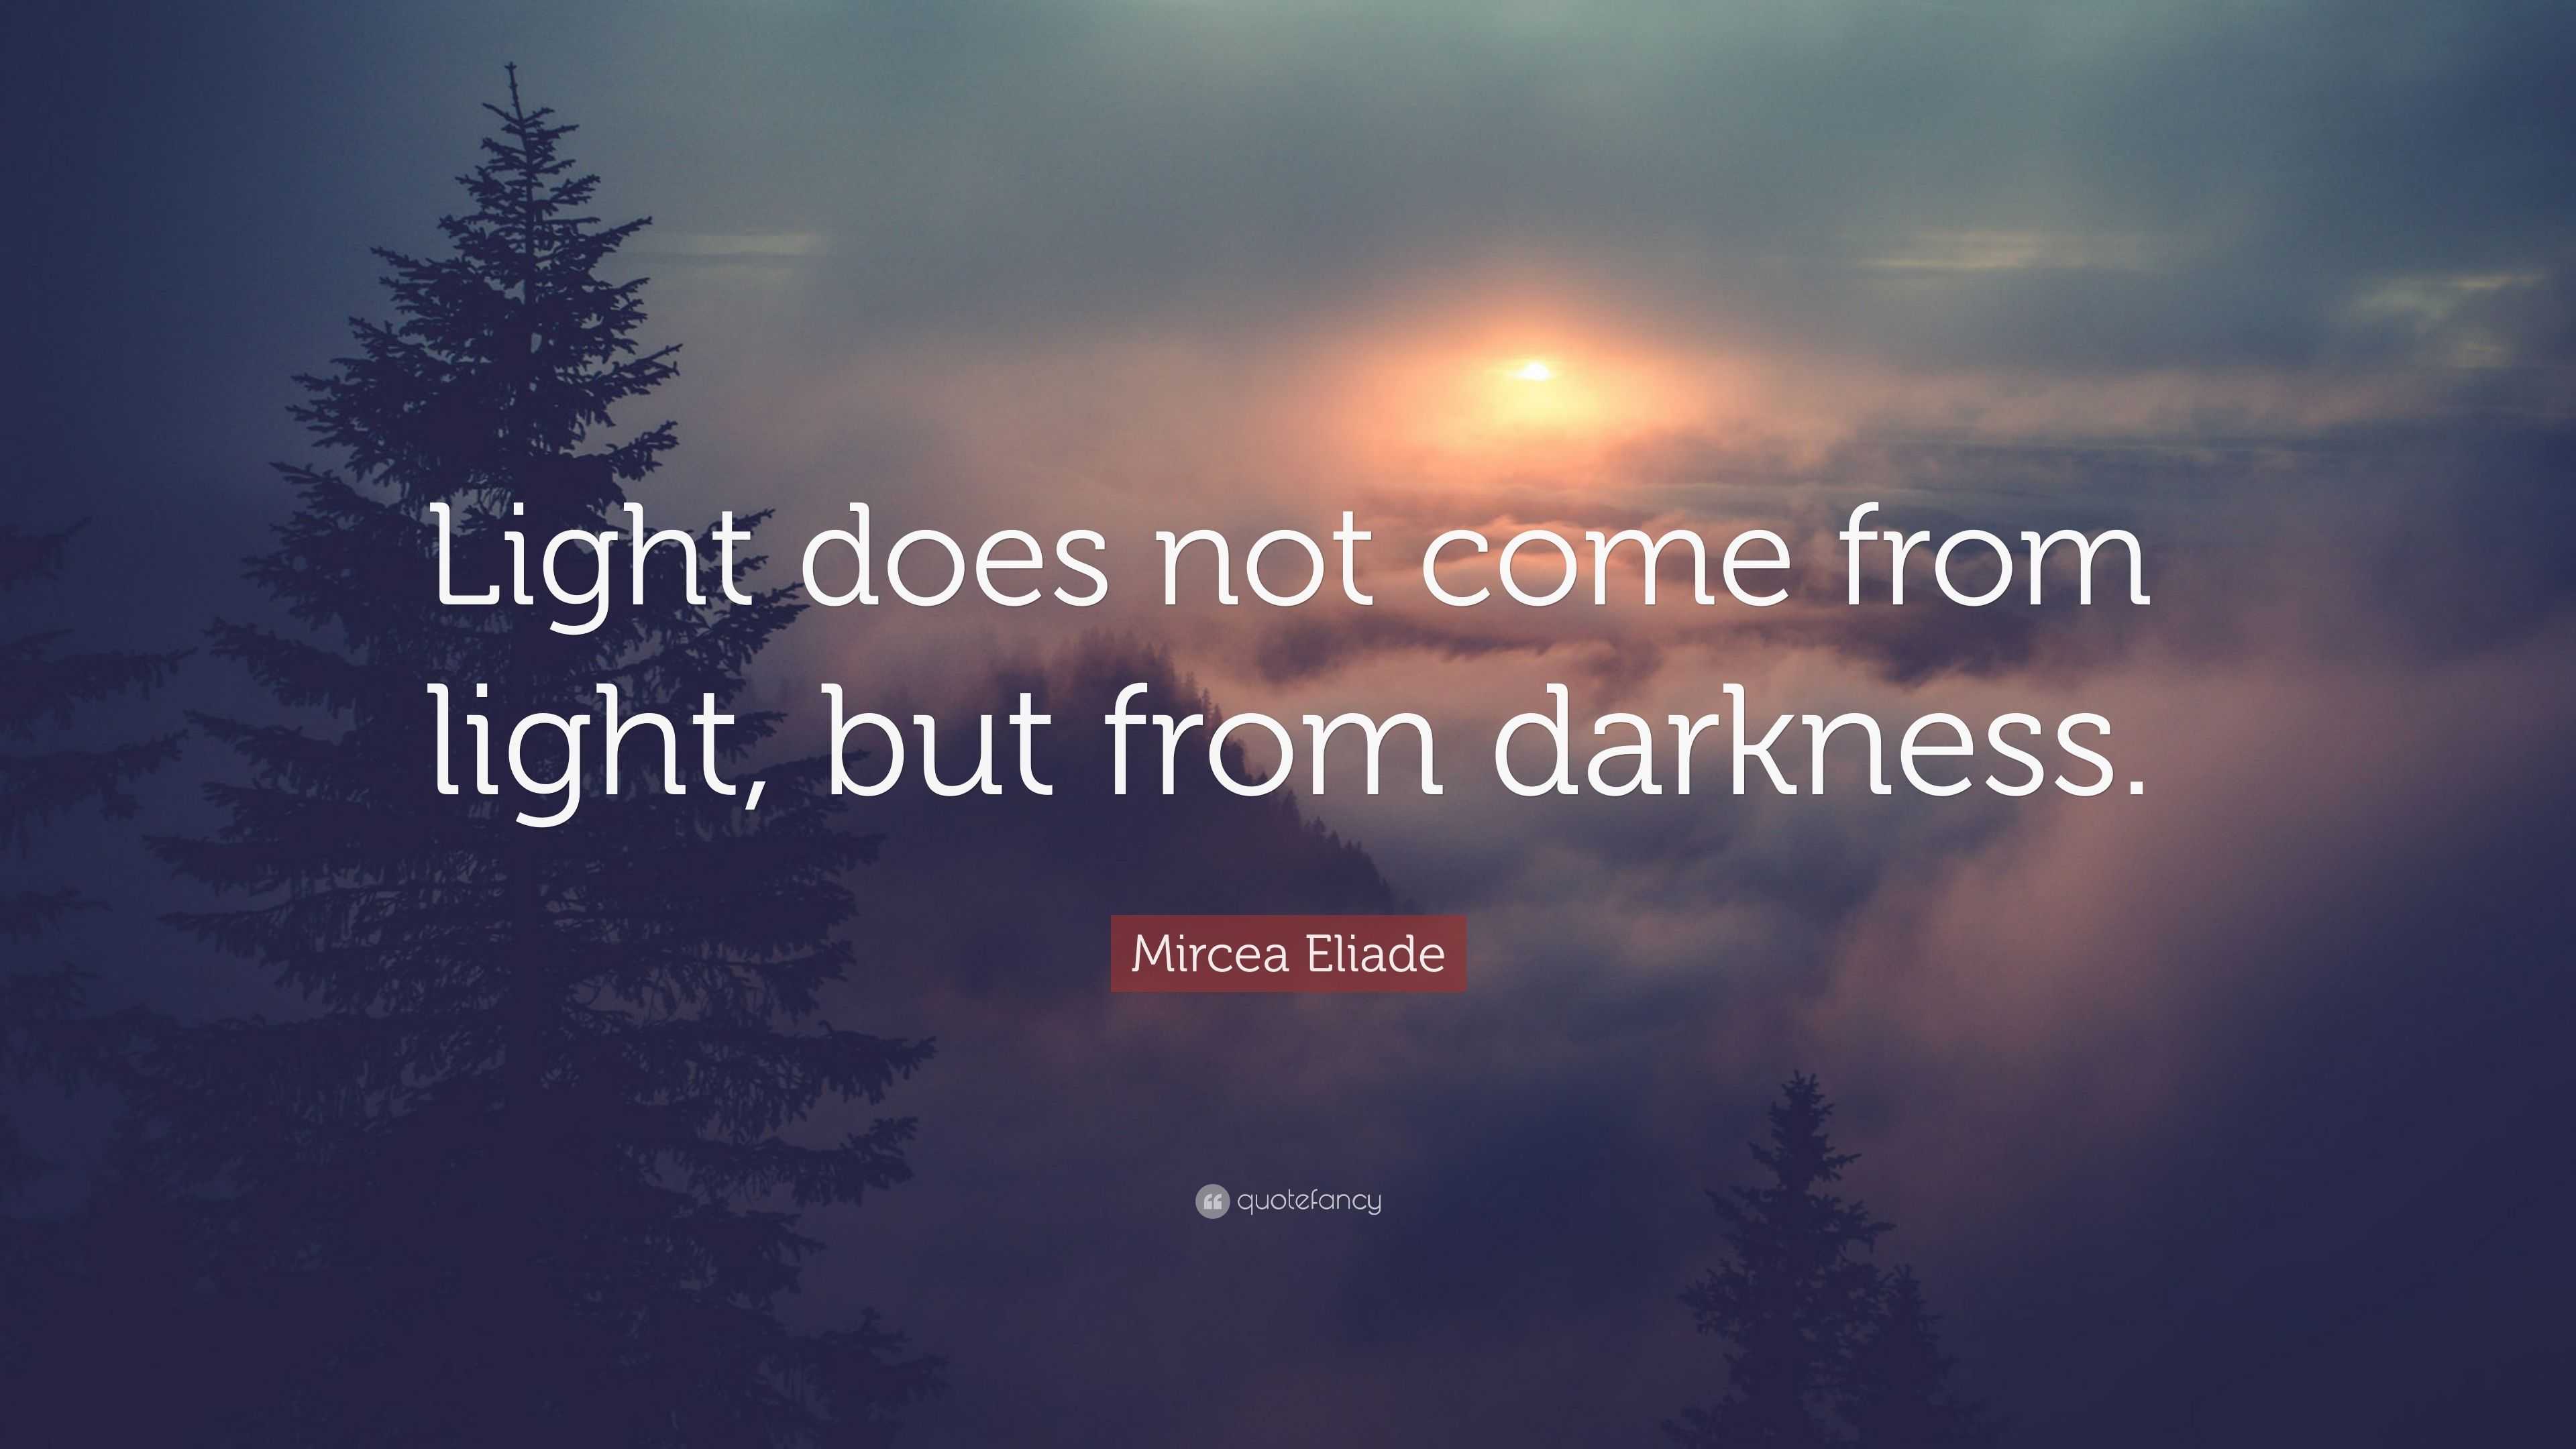 Mircea Eliade Quote: “Light does not come from light, but from darkness.”